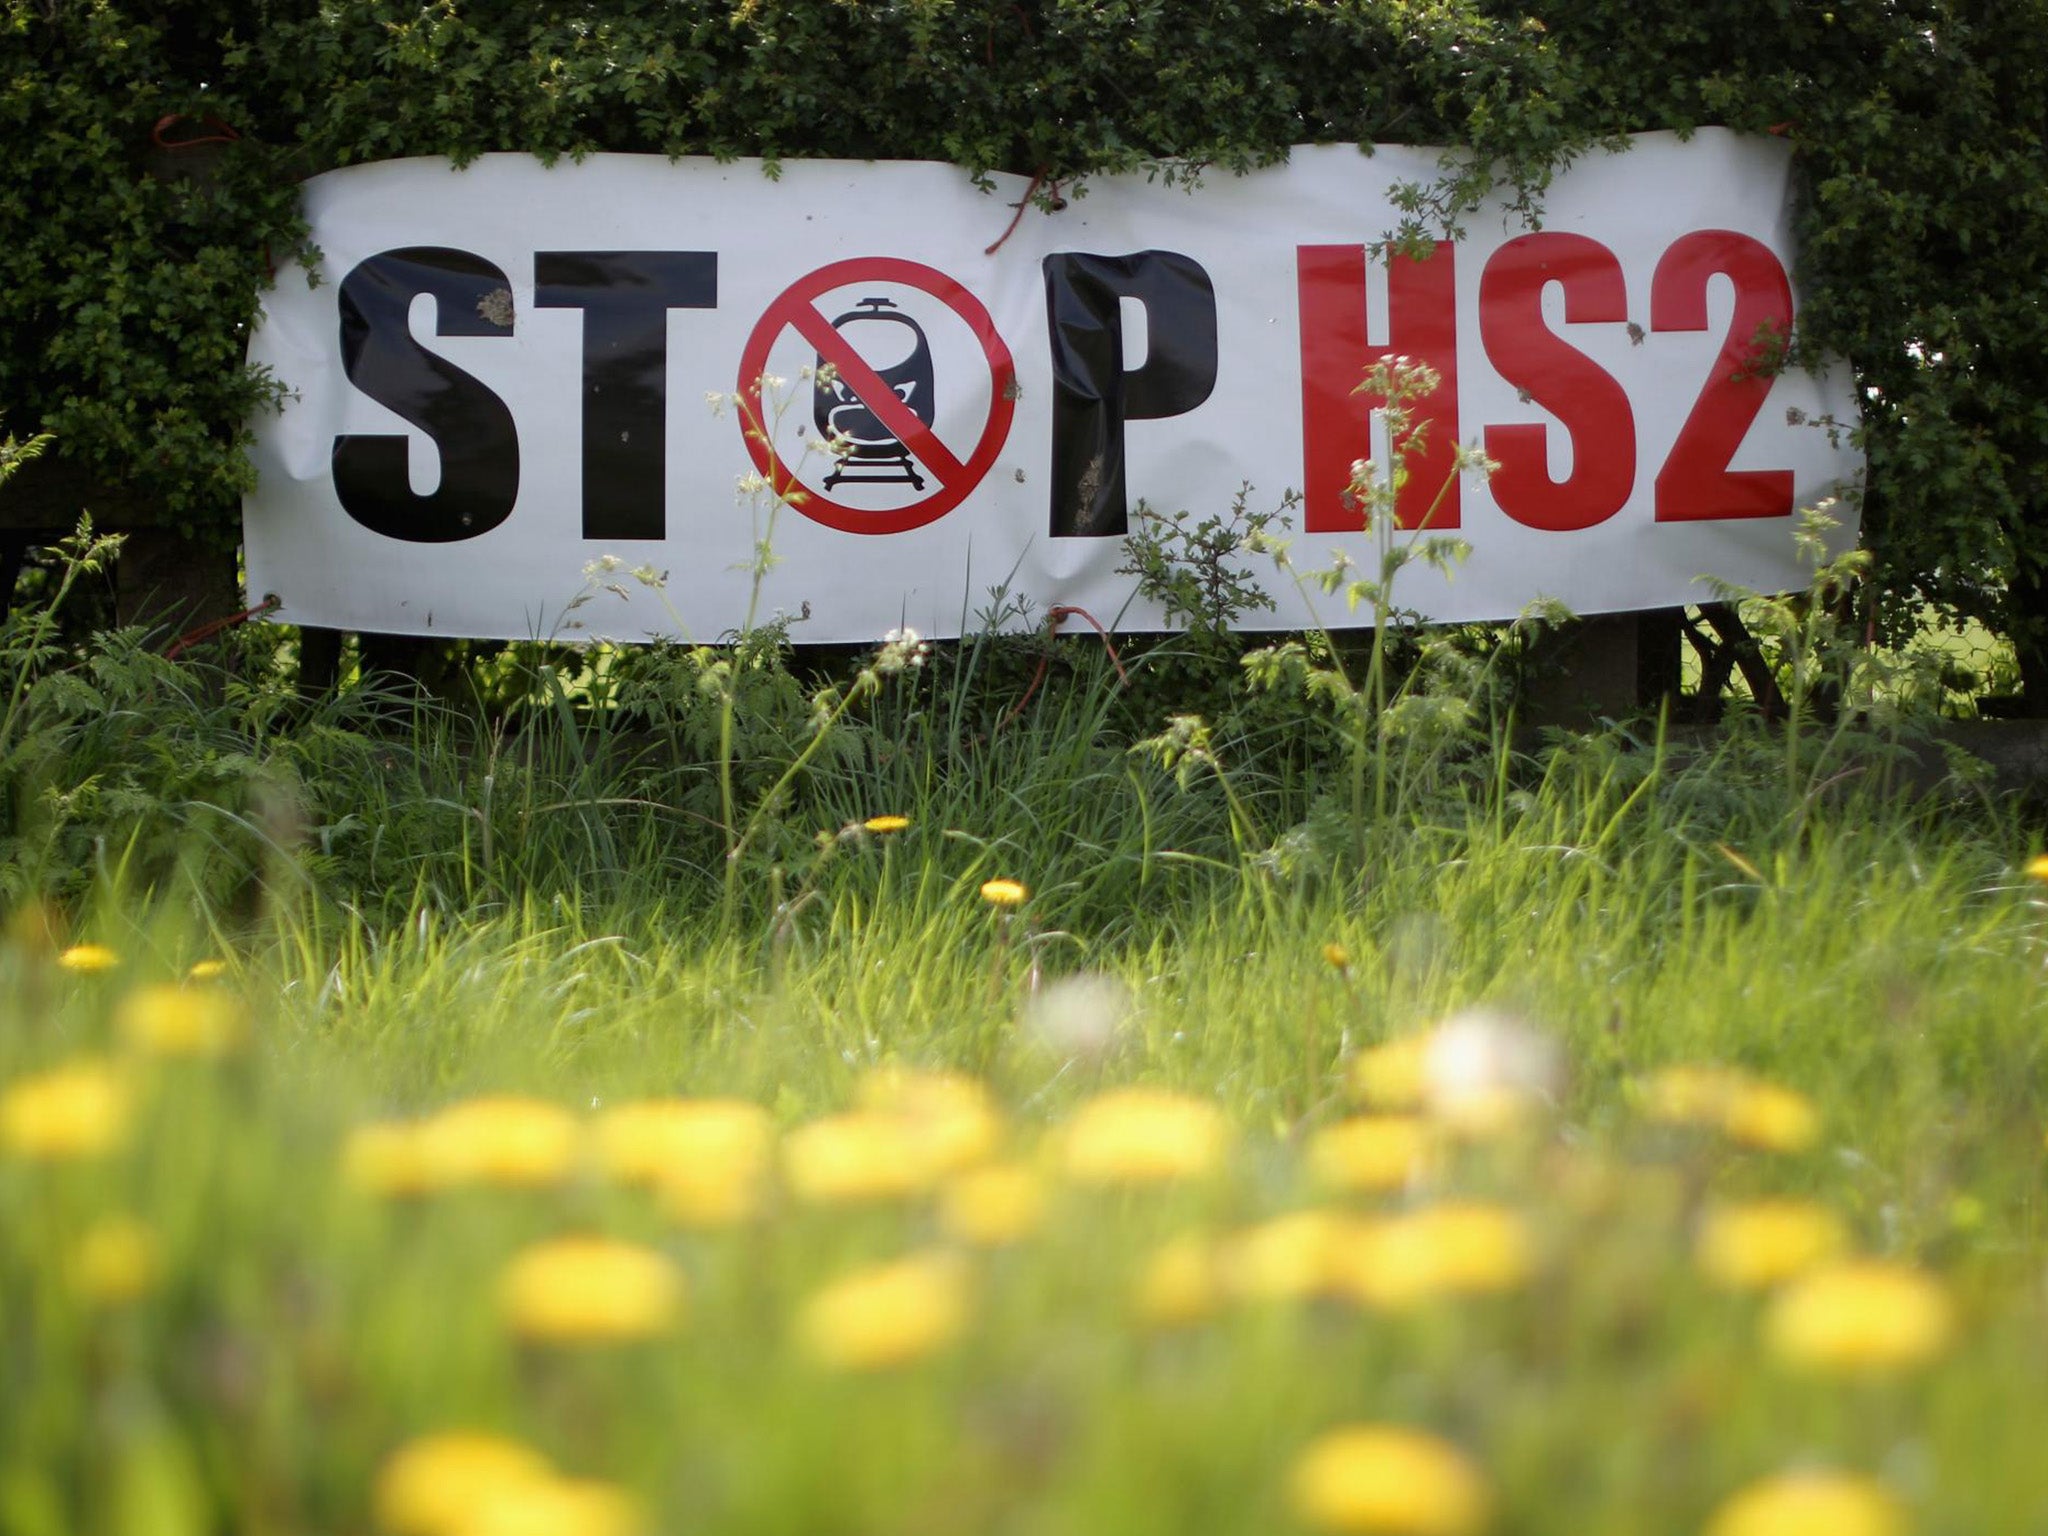 Environmental groups are concerned about the damage to irreplaceable habitats HS2 will cause